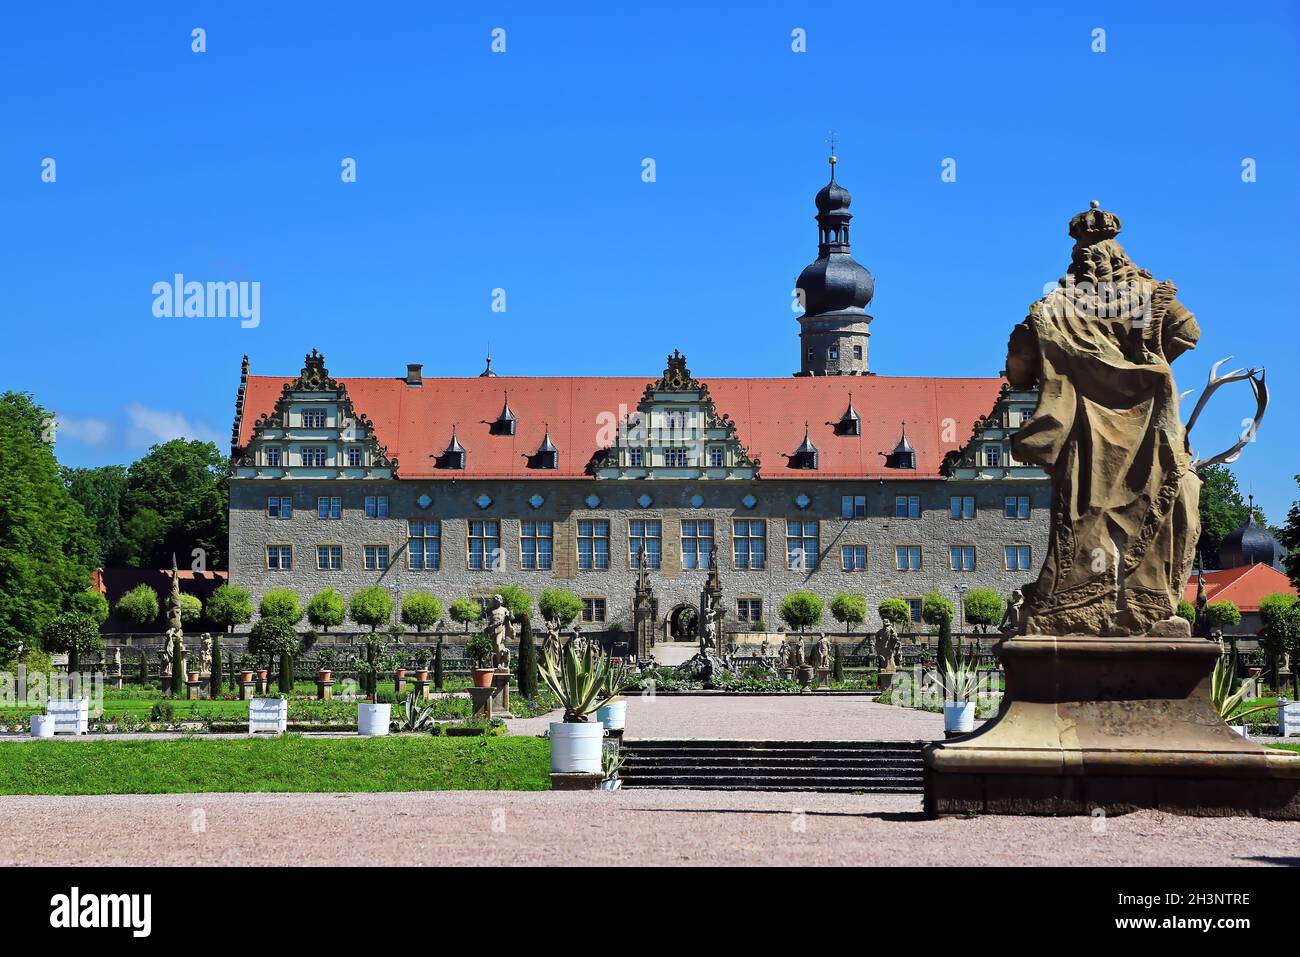 The castle is a sight of the city of Weikersheim Stock Photo